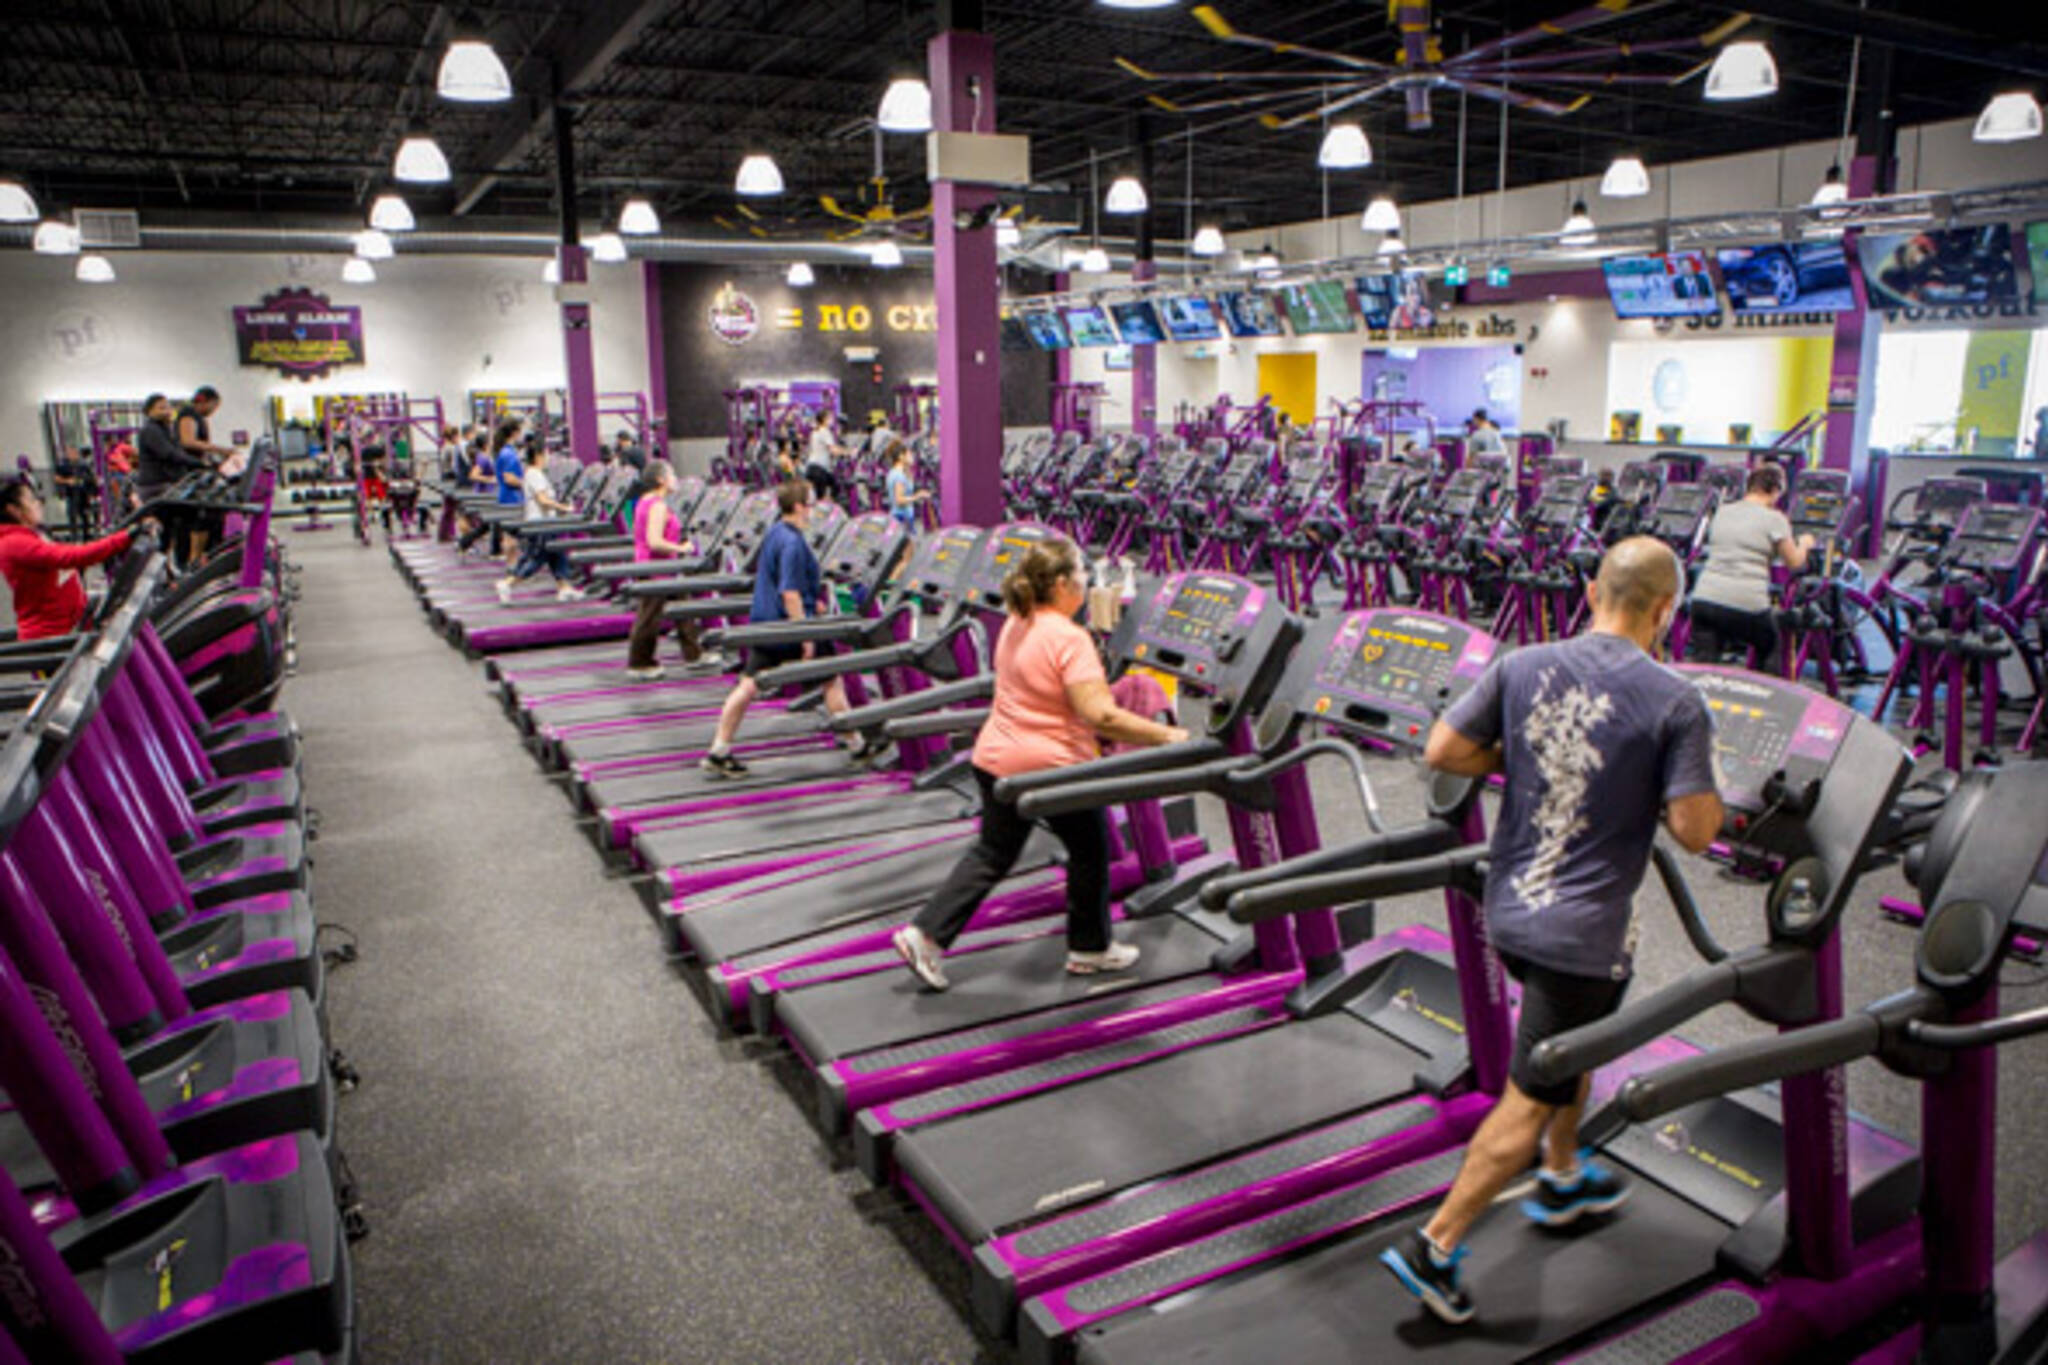 15 Minute Can You Pay For Just One Month At Planet Fitness for Women